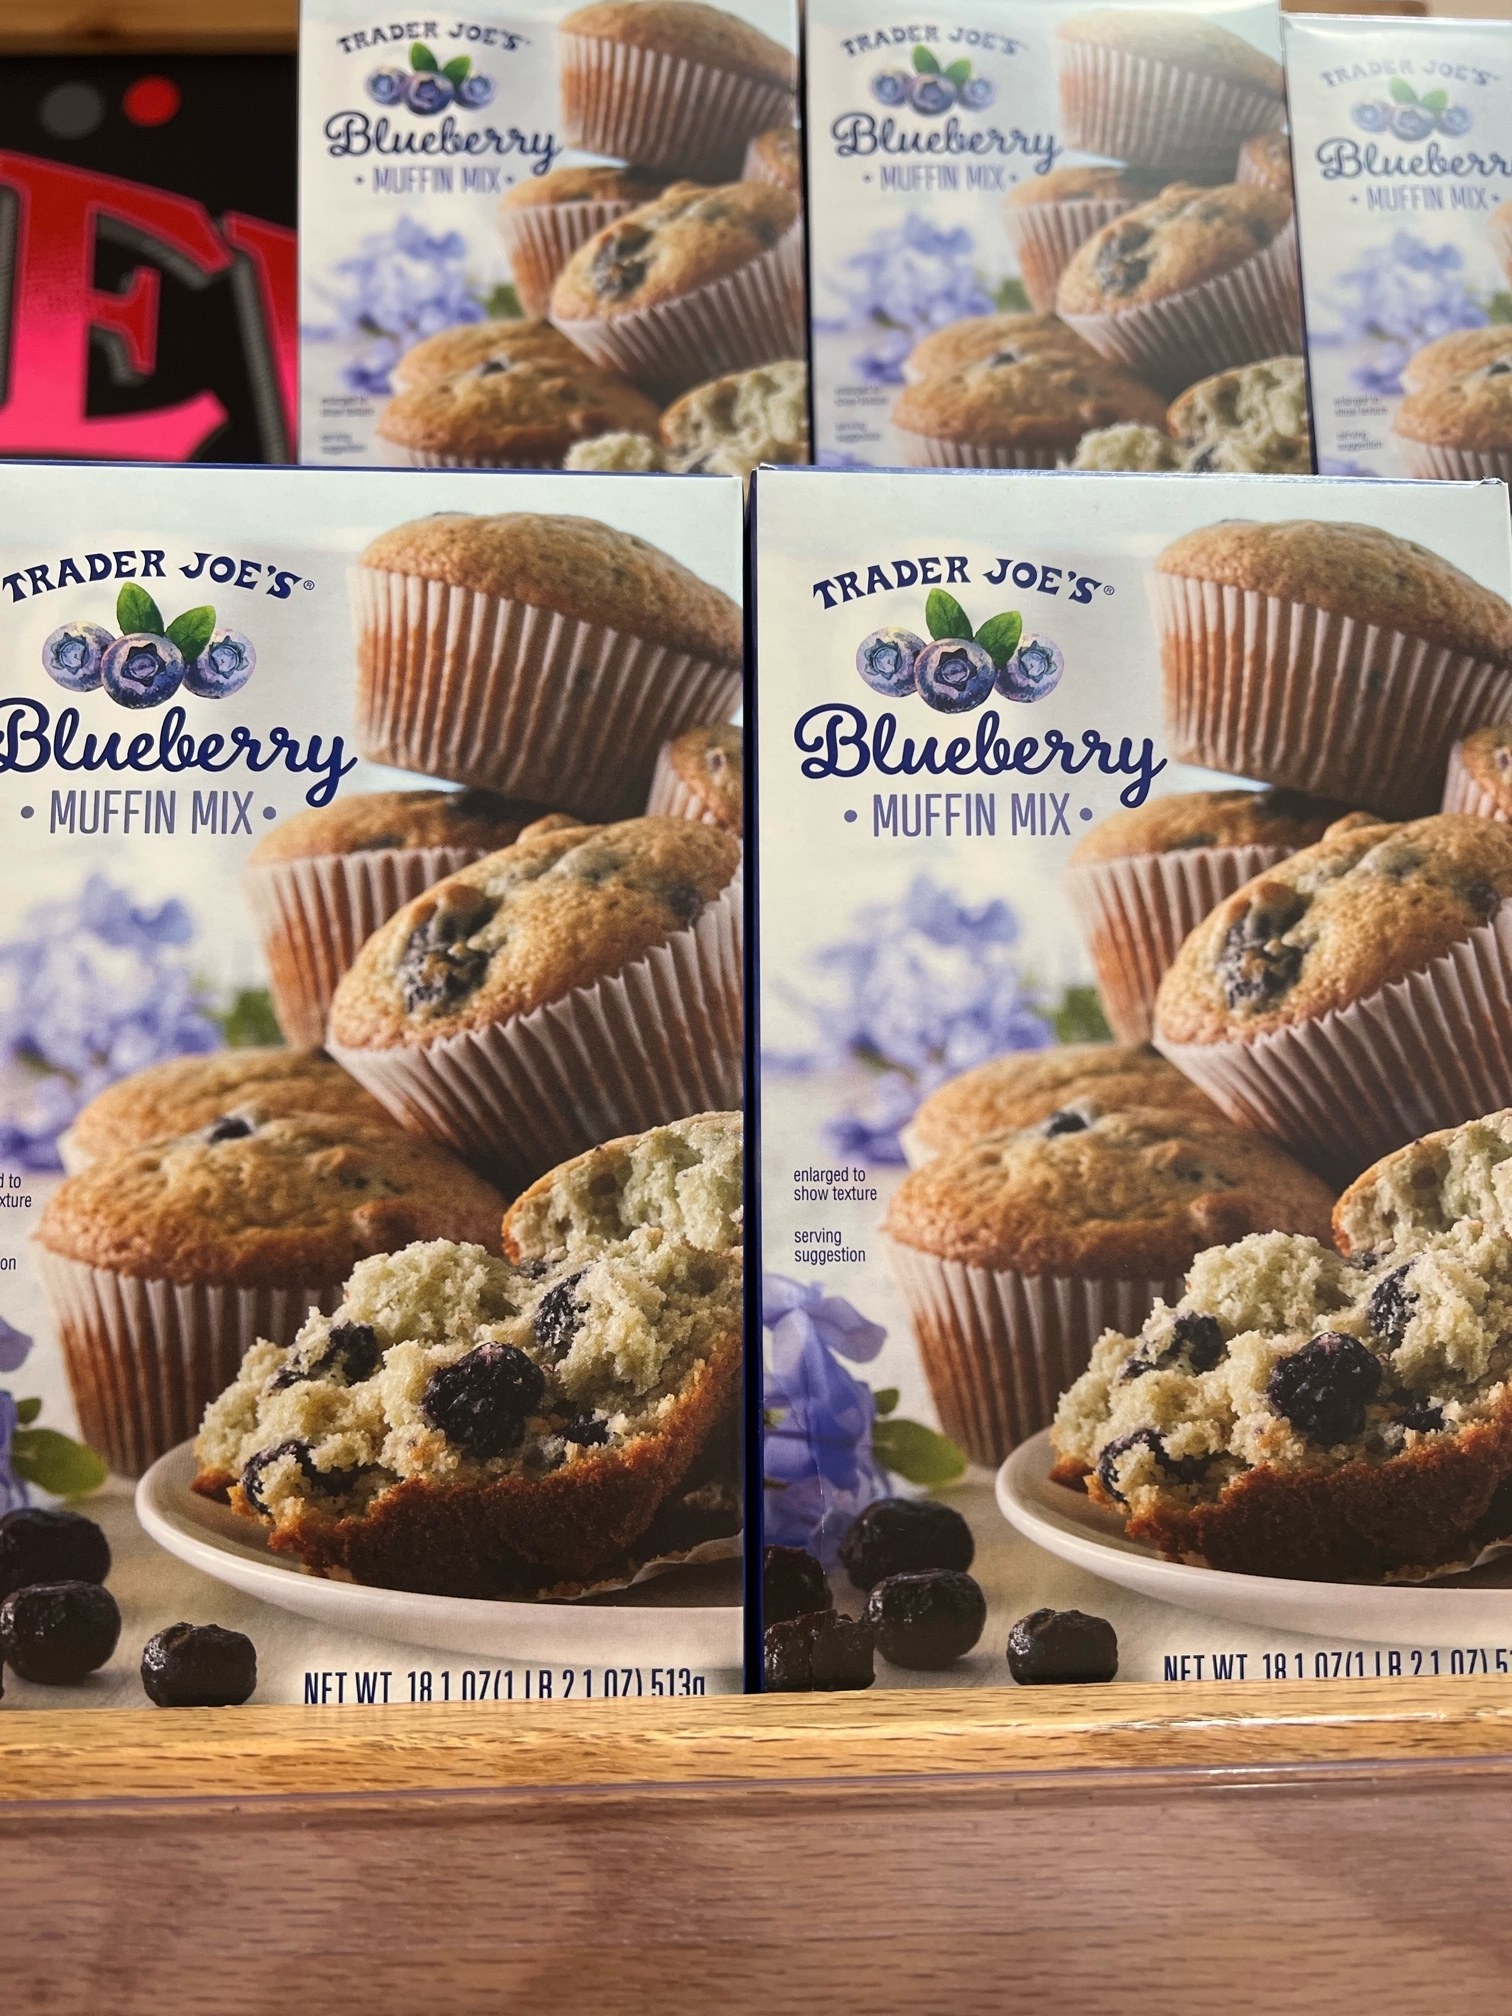 Boxes of Blueberry Muffin Mix